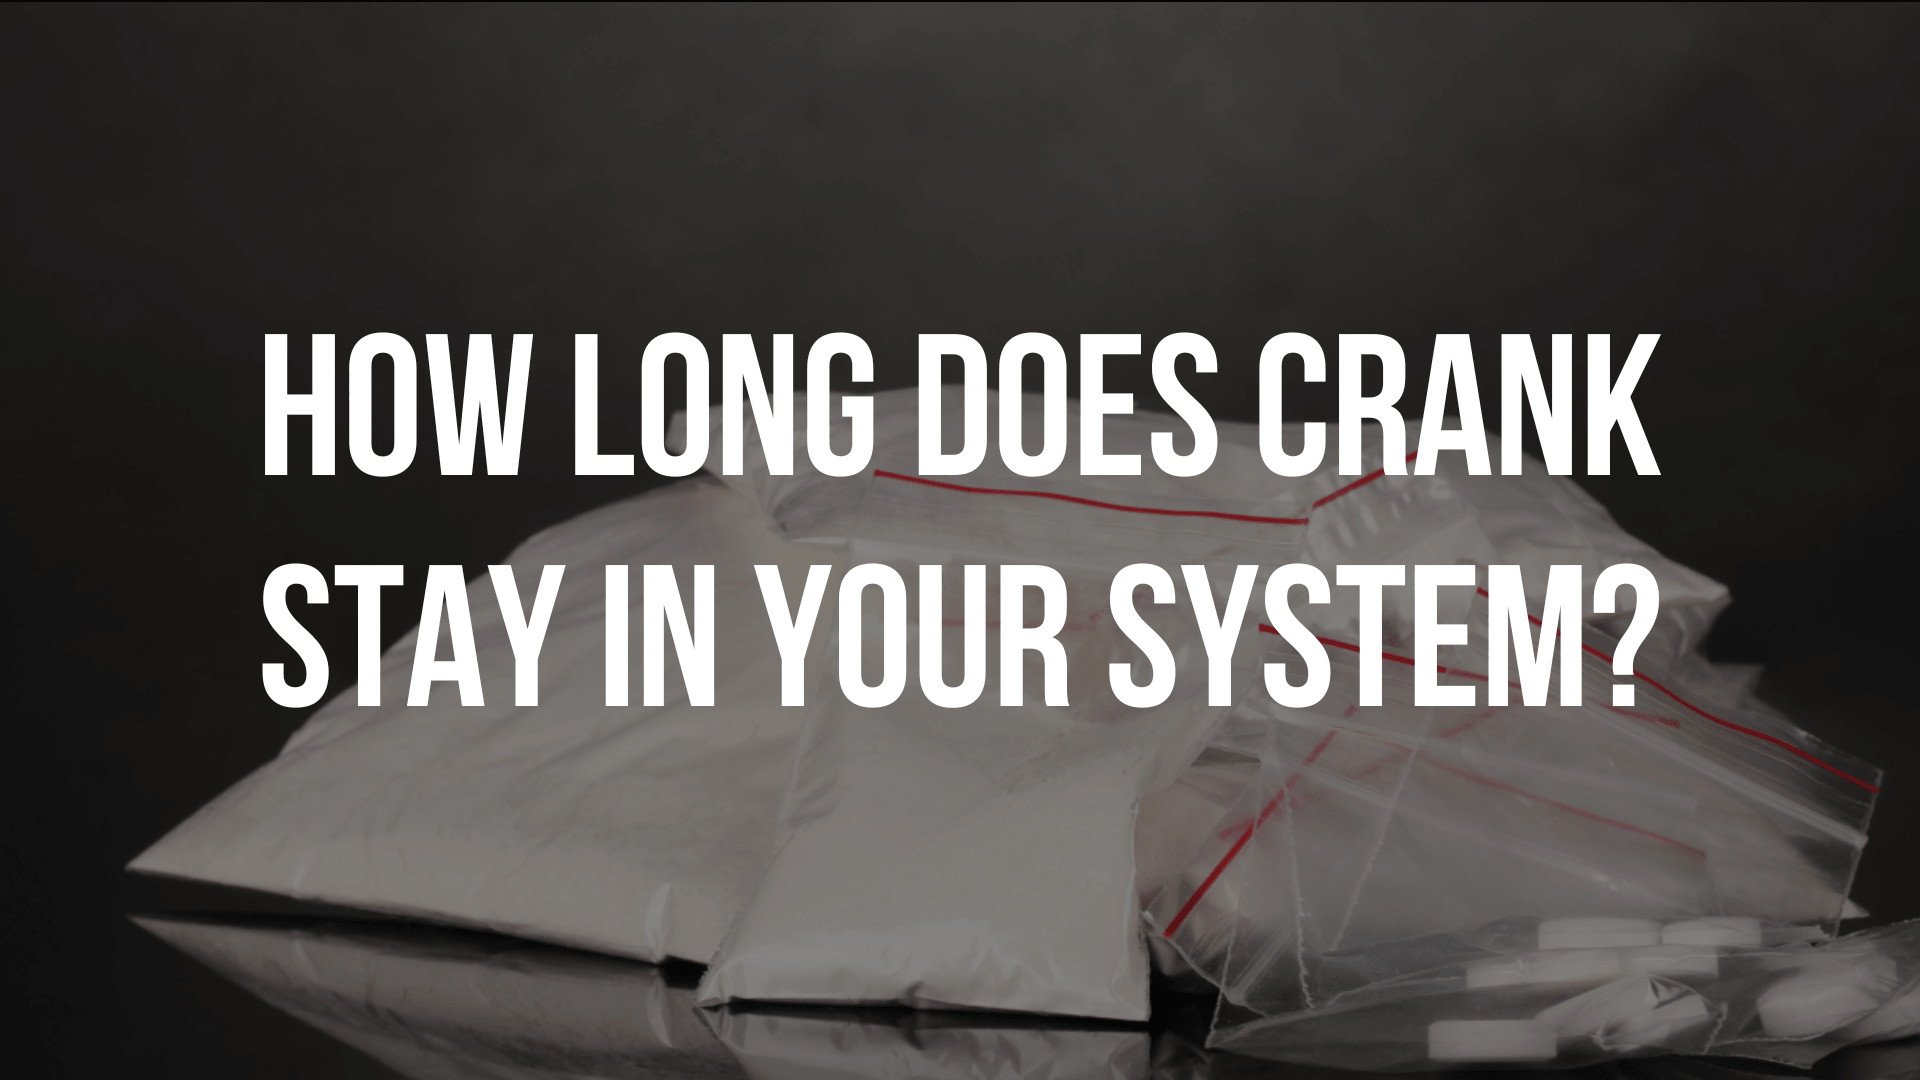 How Long Does Crank Stay in Your System?